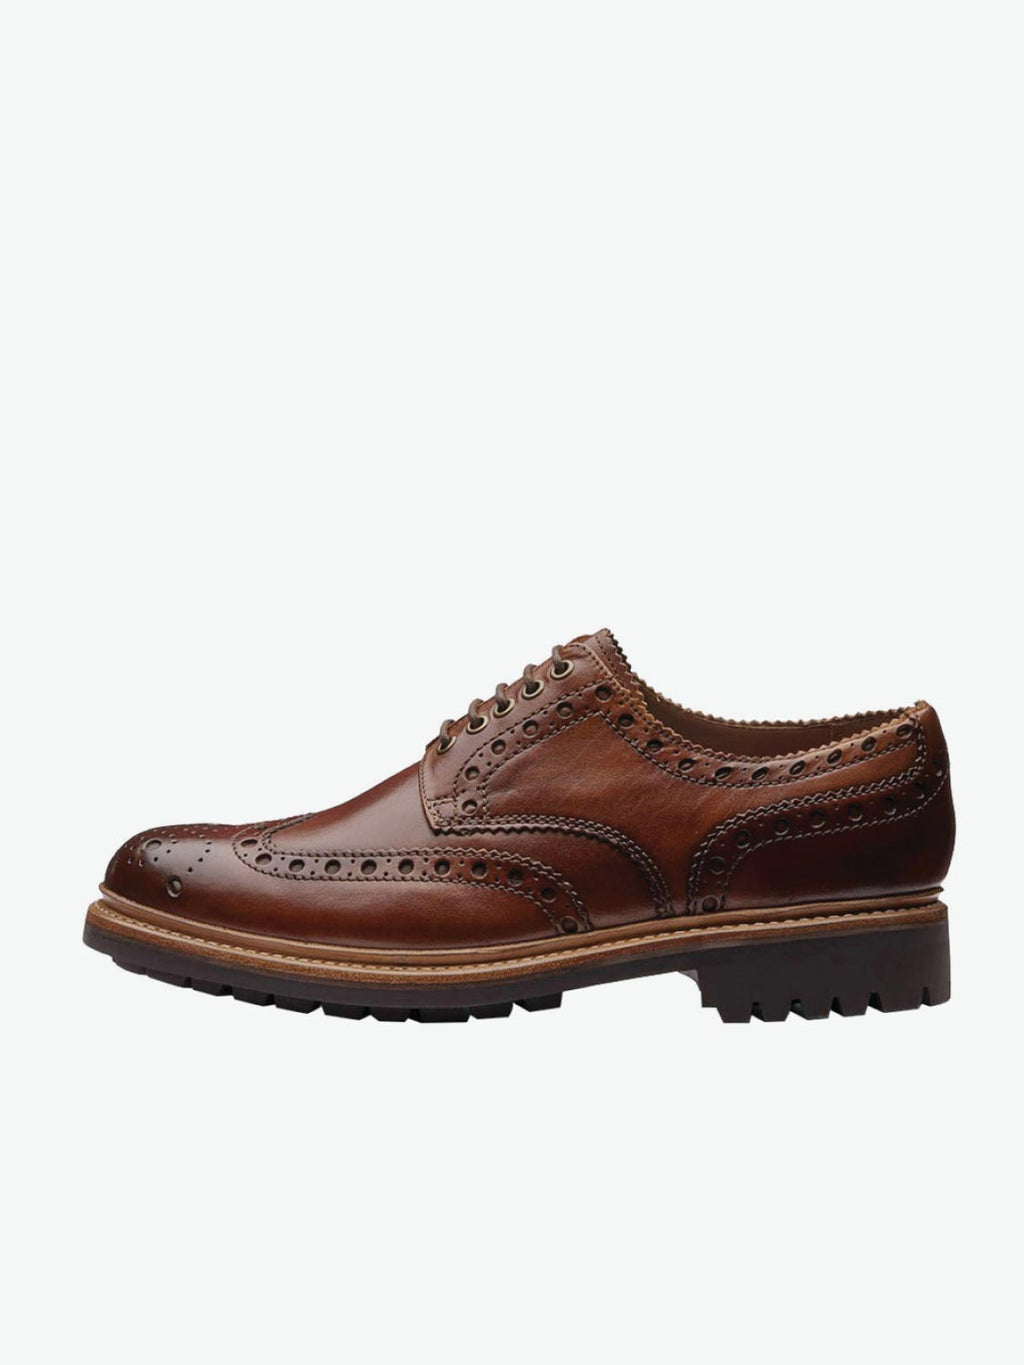 Grenson | Men's Handmade Shoes and Sneakers